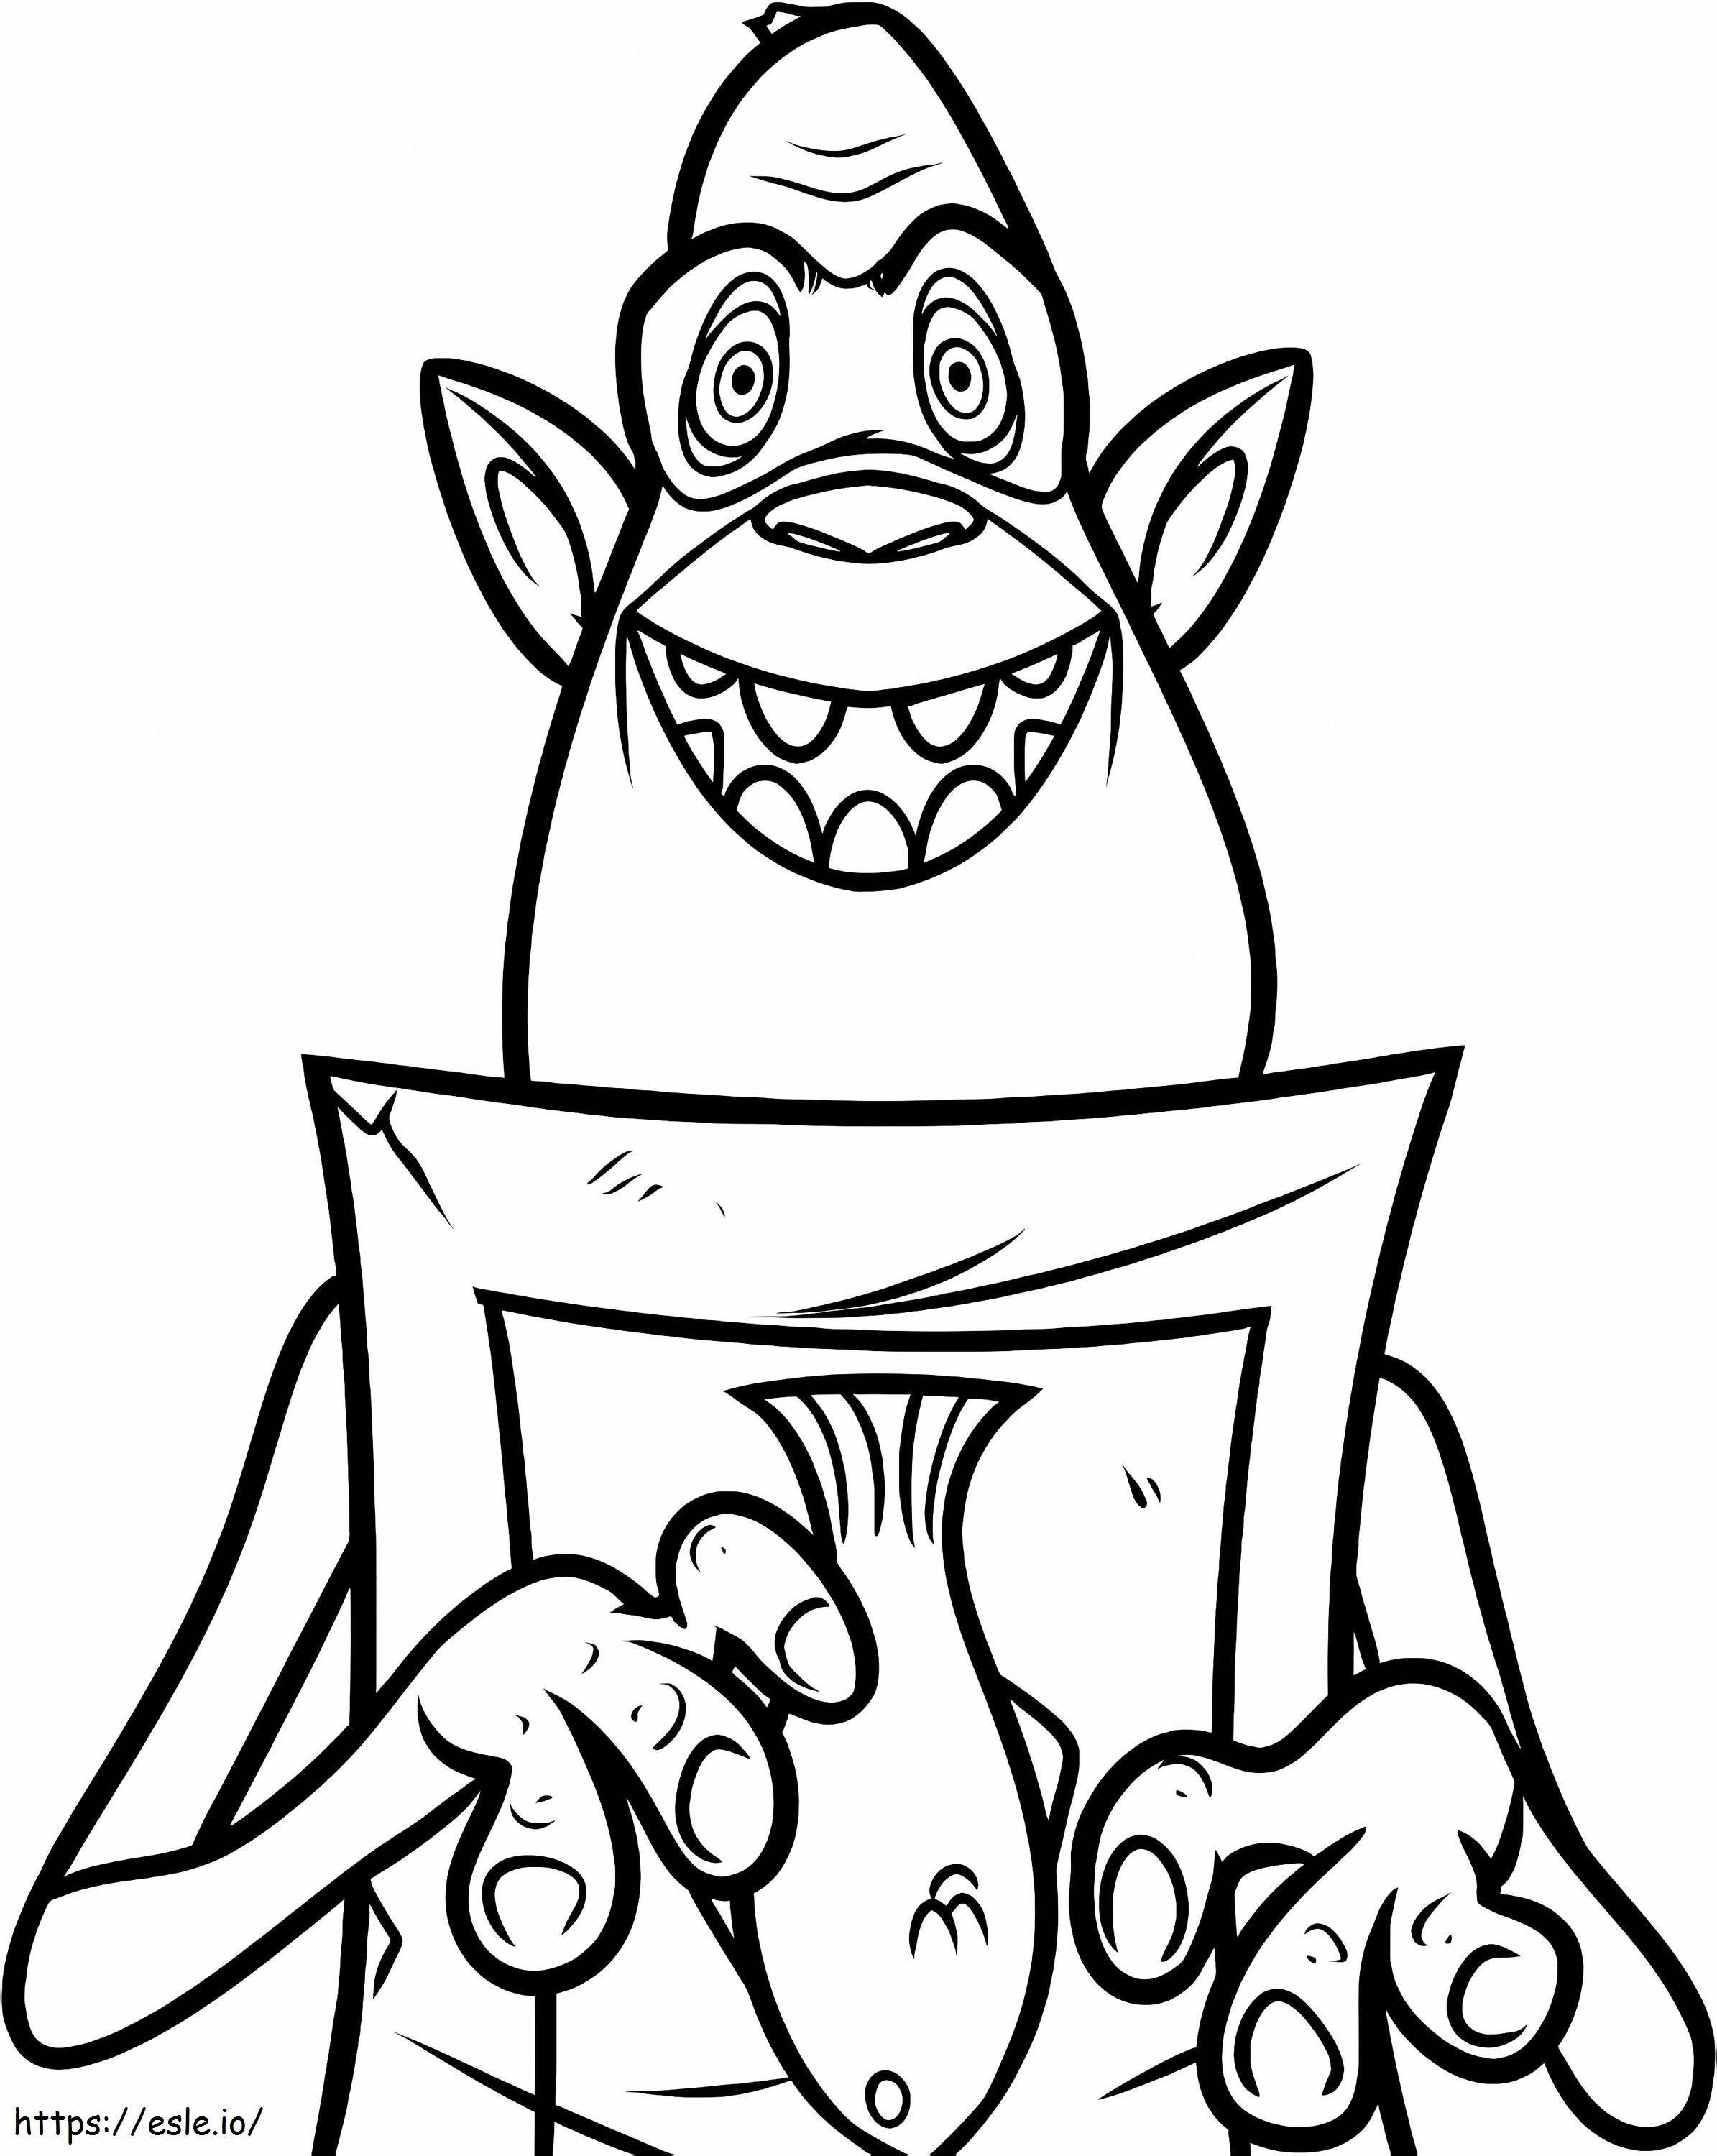 Fish From Boxtrolls coloring page